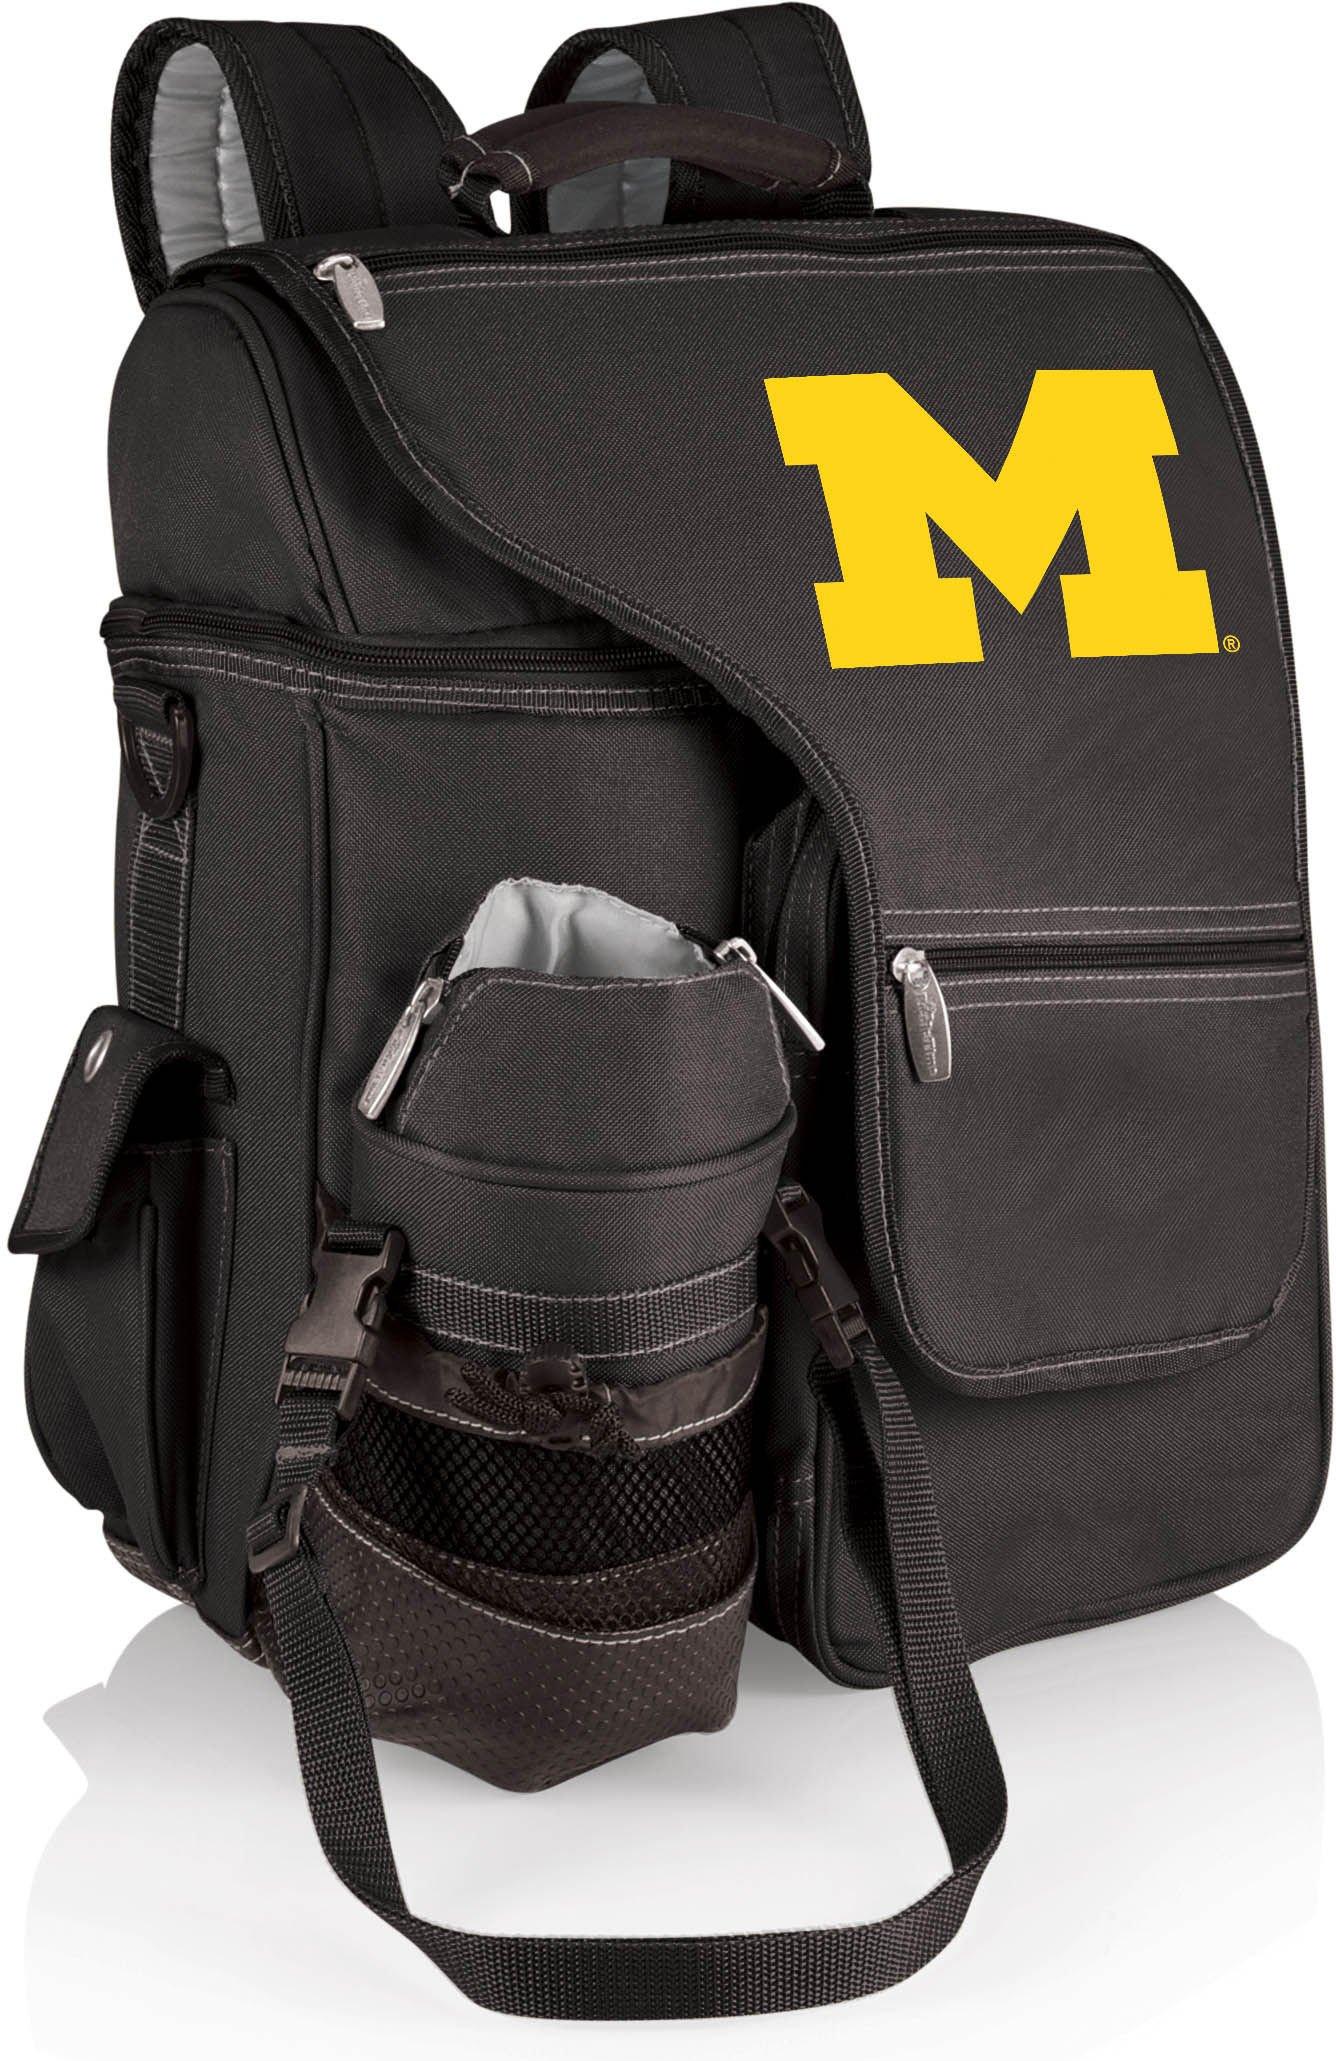 Wolverine Turismo Backpack by Picnic Time